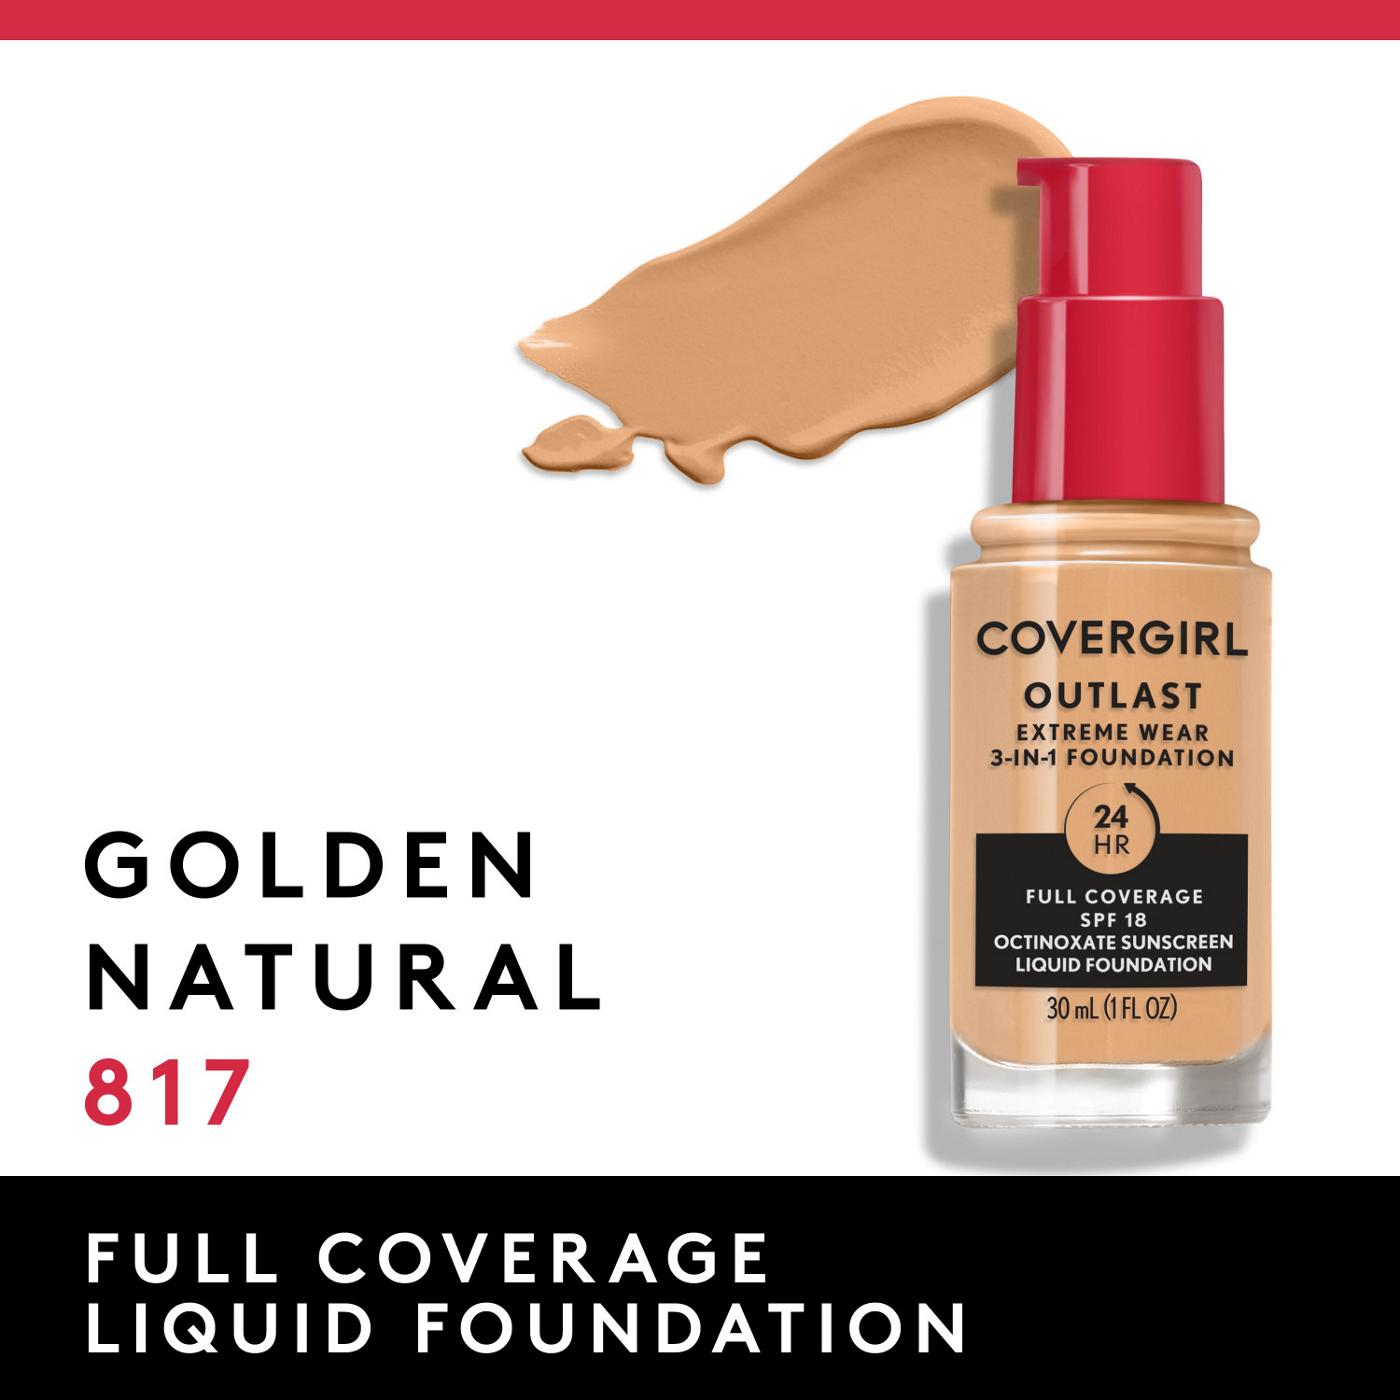 Covergirl Outlast Extreme Wear Liquid Foundation 817 Golden Natural; image 3 of 11